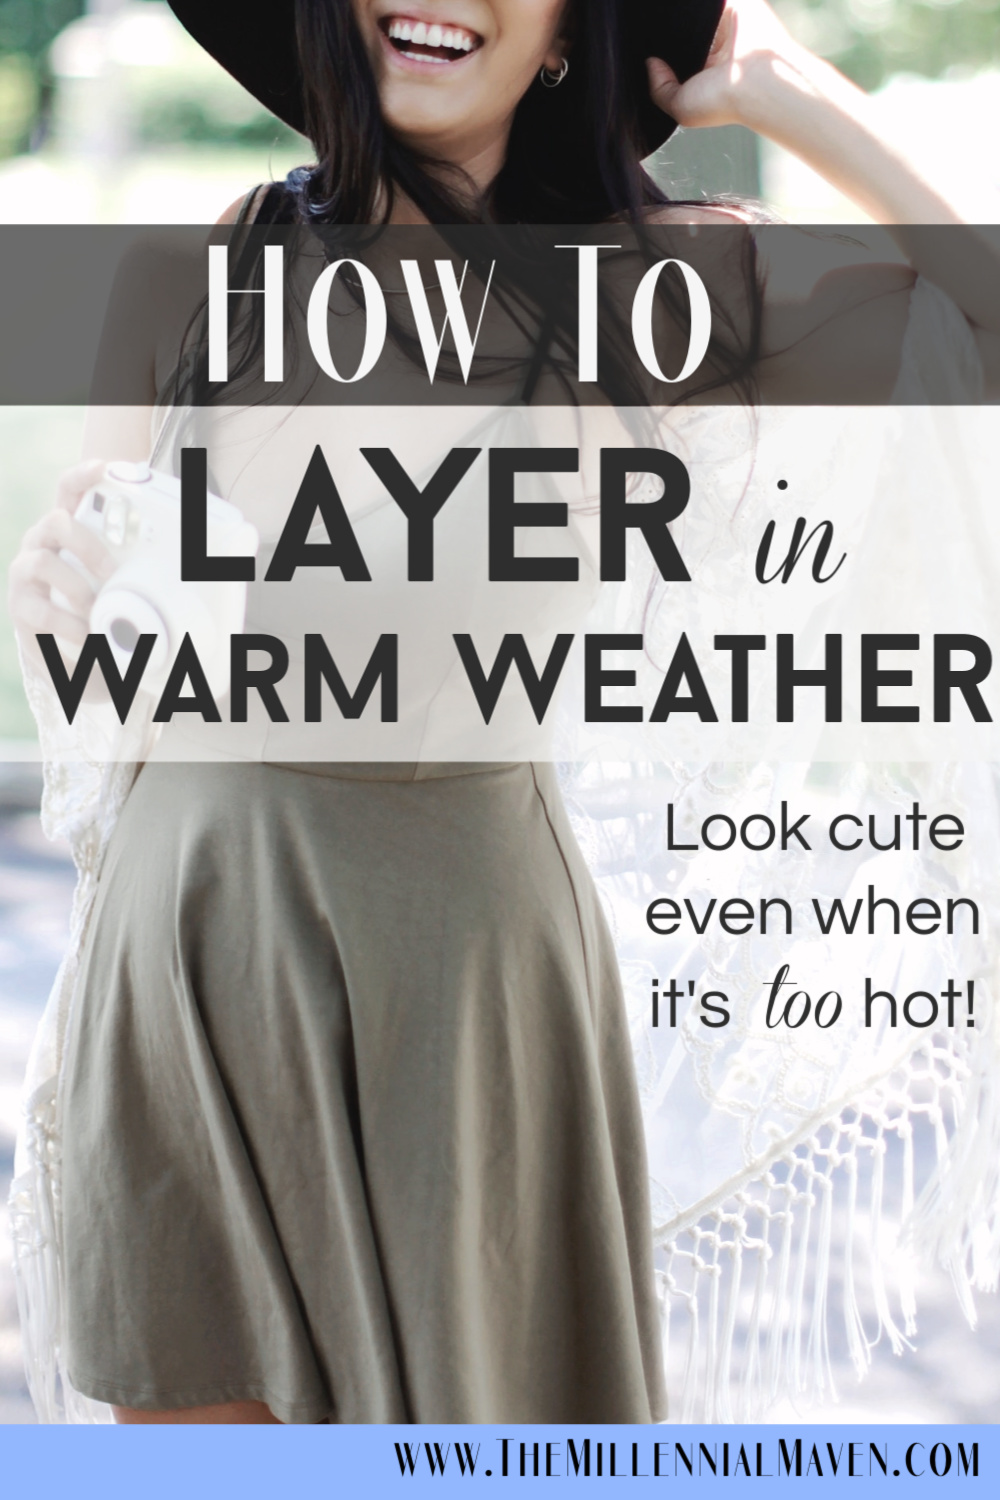 Warm Weather Outfits || How To Layer When It's Hot & Look Stylish